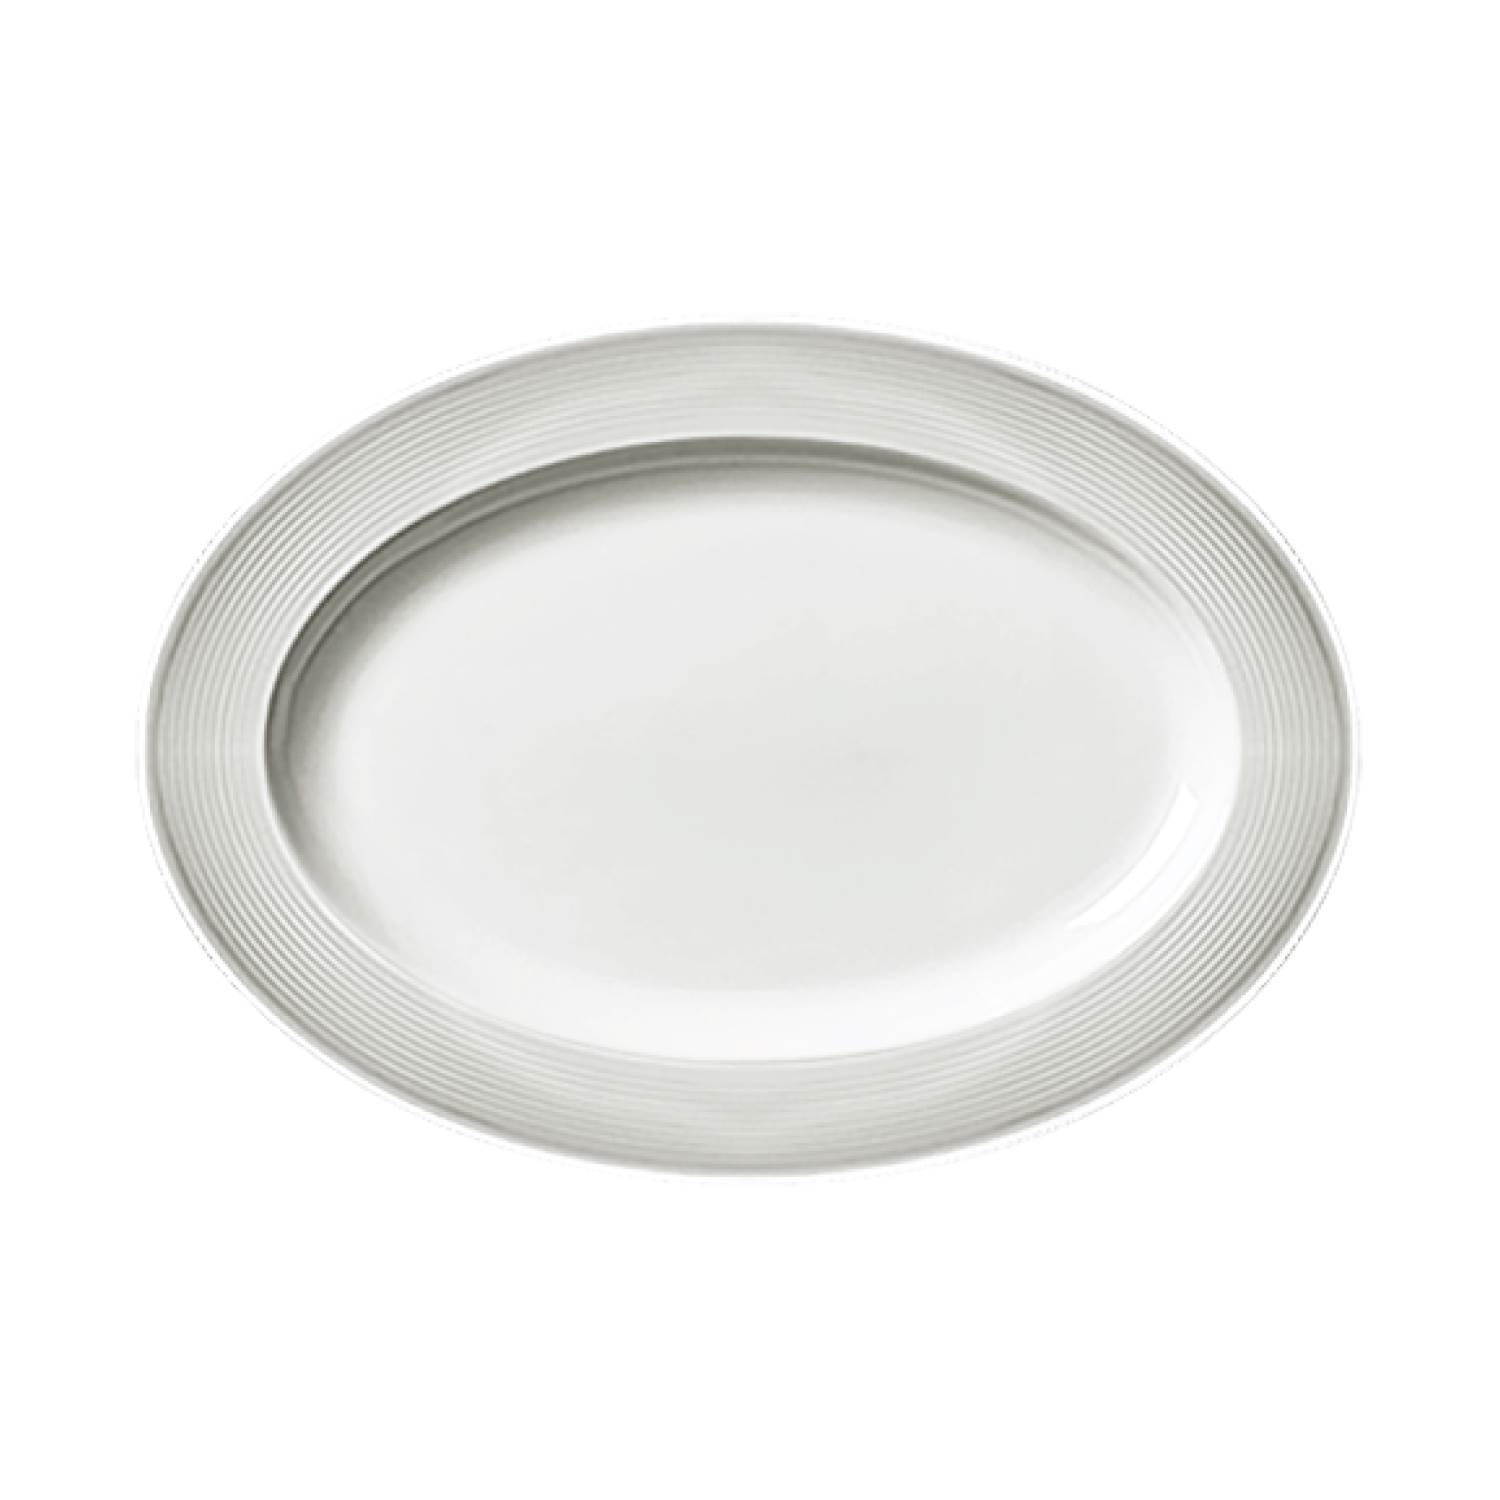 Baralee Wish Oval Plate